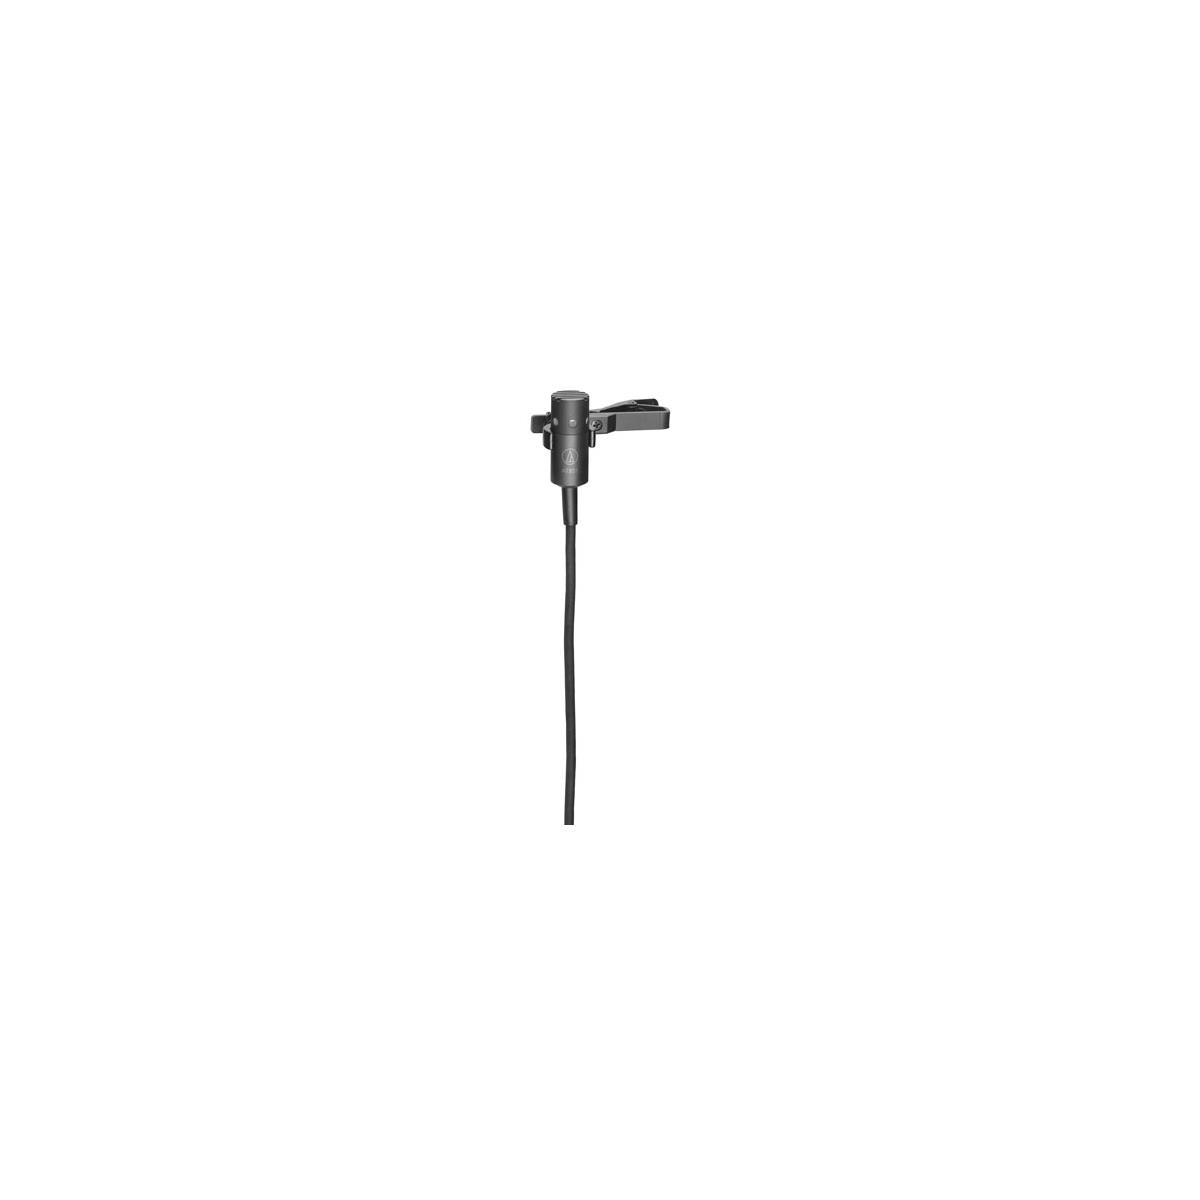 Image of Audio-Technica AT831R Cardioid Condenser Lavalier Microphone